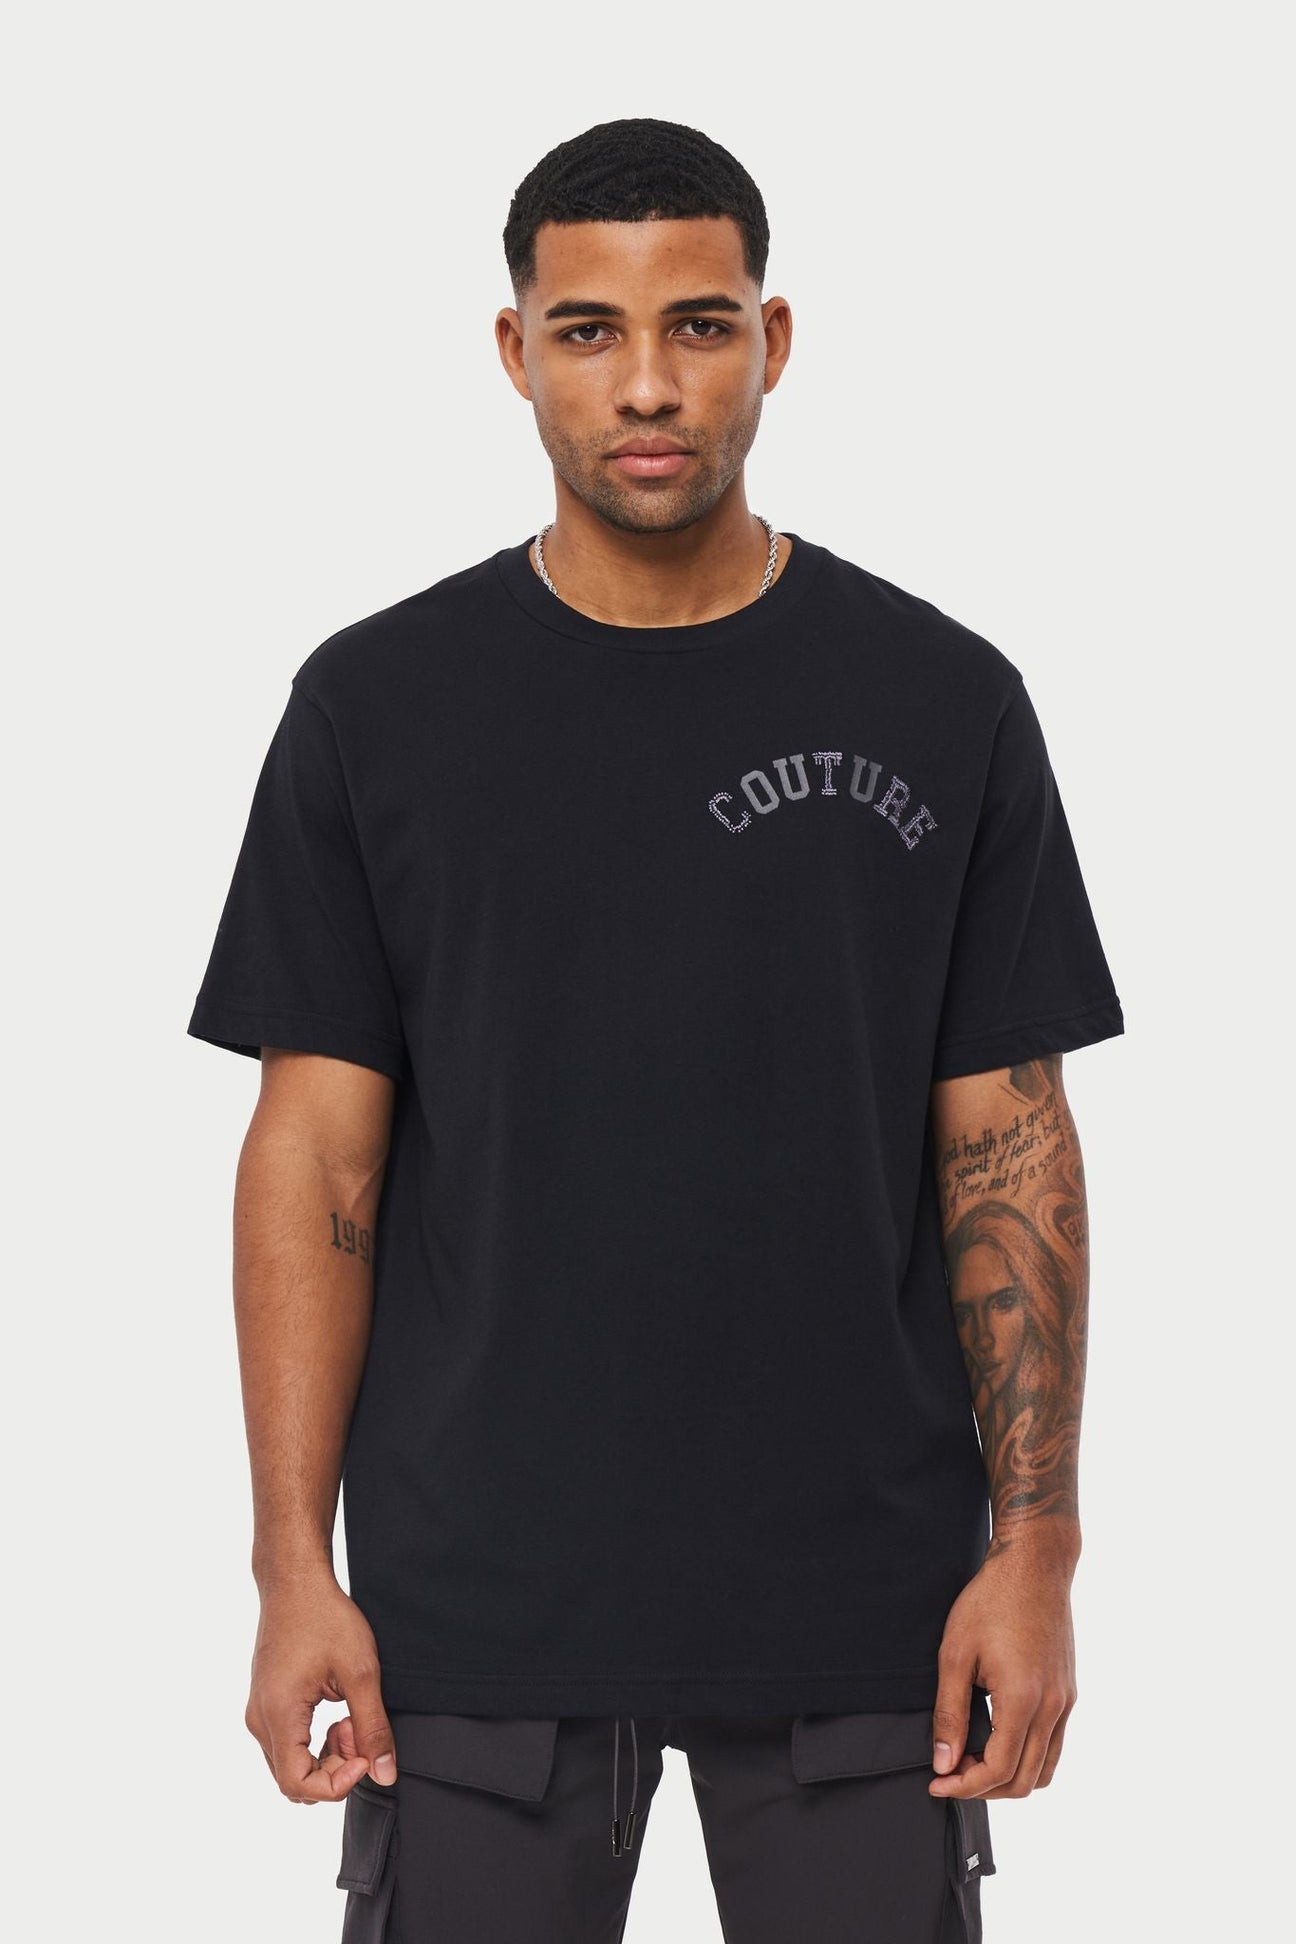 Men's T Shirts | Print & Graphic Tees | The Couture Club